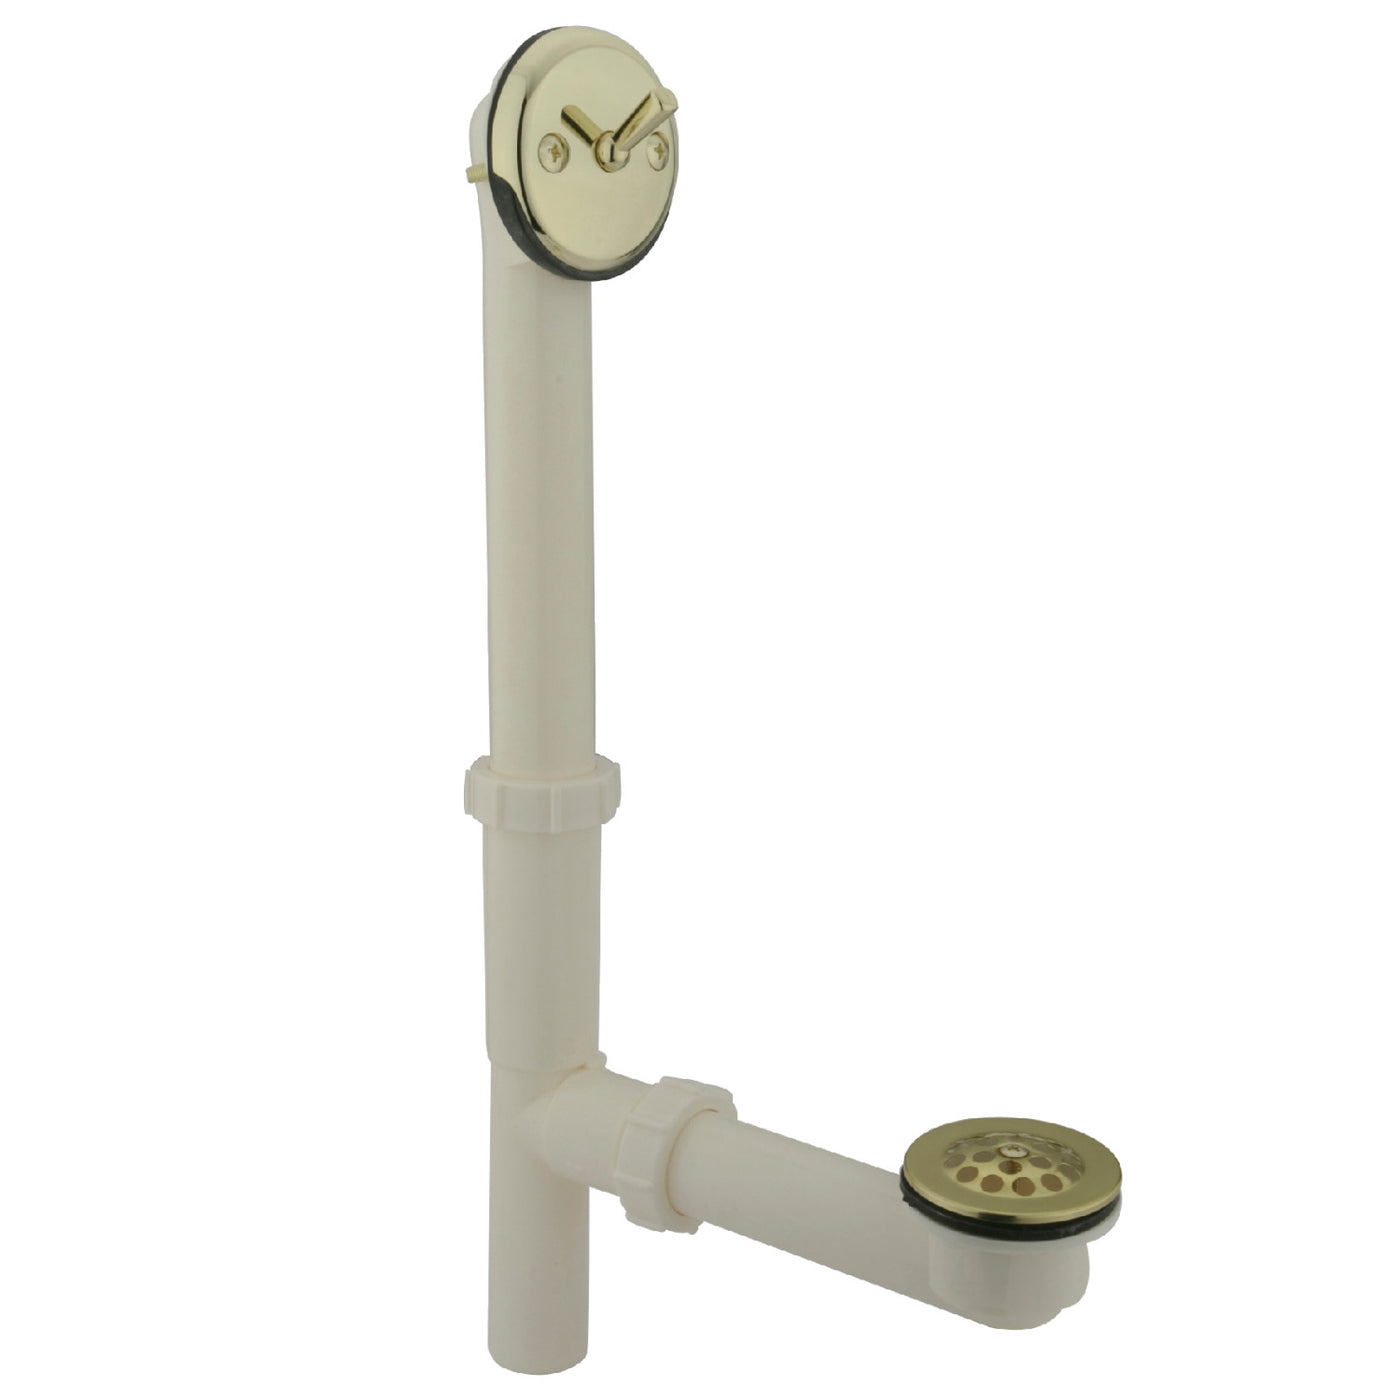 Elements of Design EDTLA1162 14-Inch Trip Lever Waste and Overflow with Grid, Polished Brass